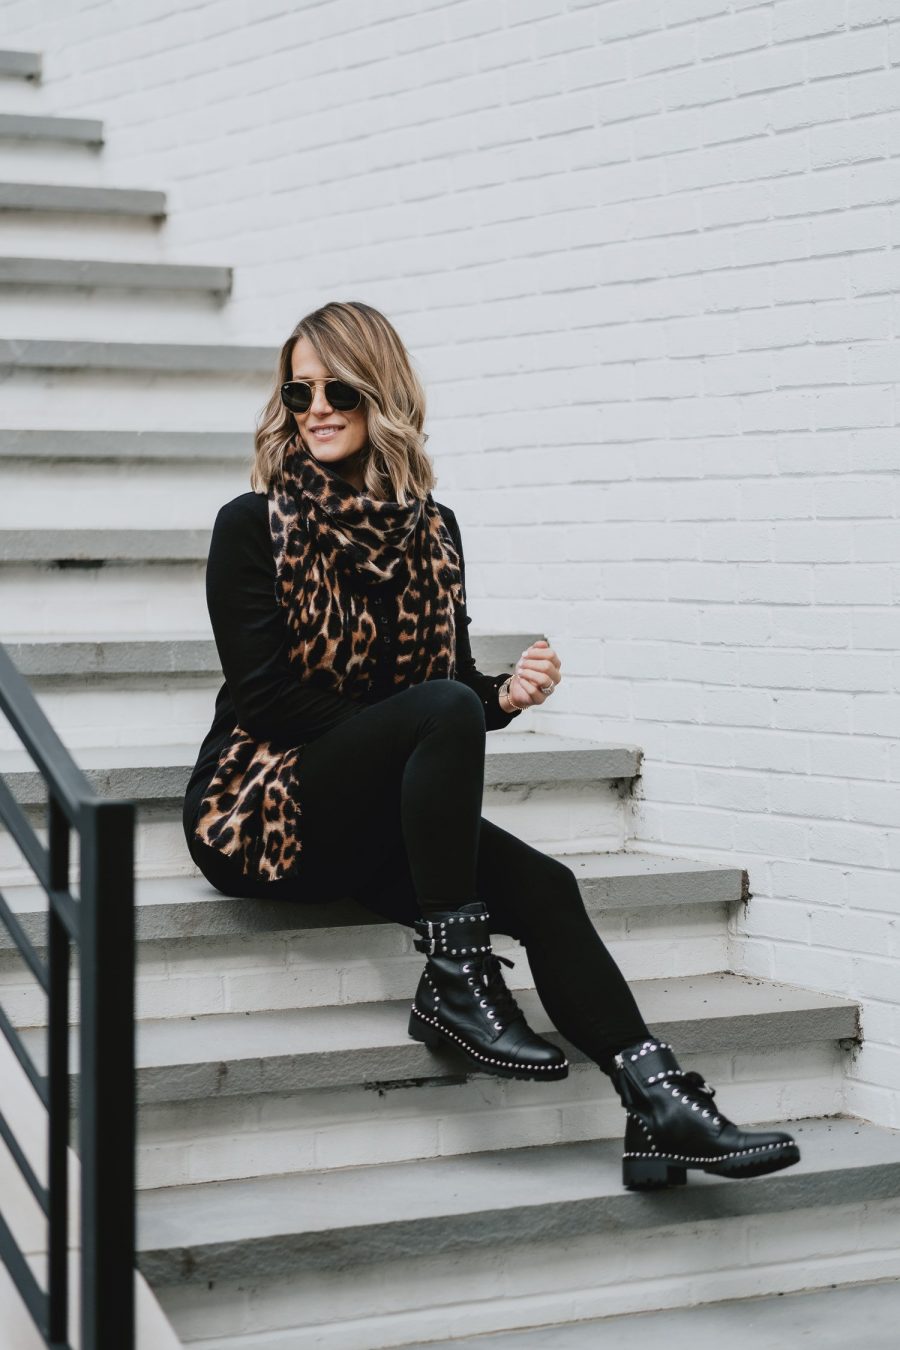 Suzanne wearing a black long sleeve tee, leggings, combat boots, and a leopard scarf